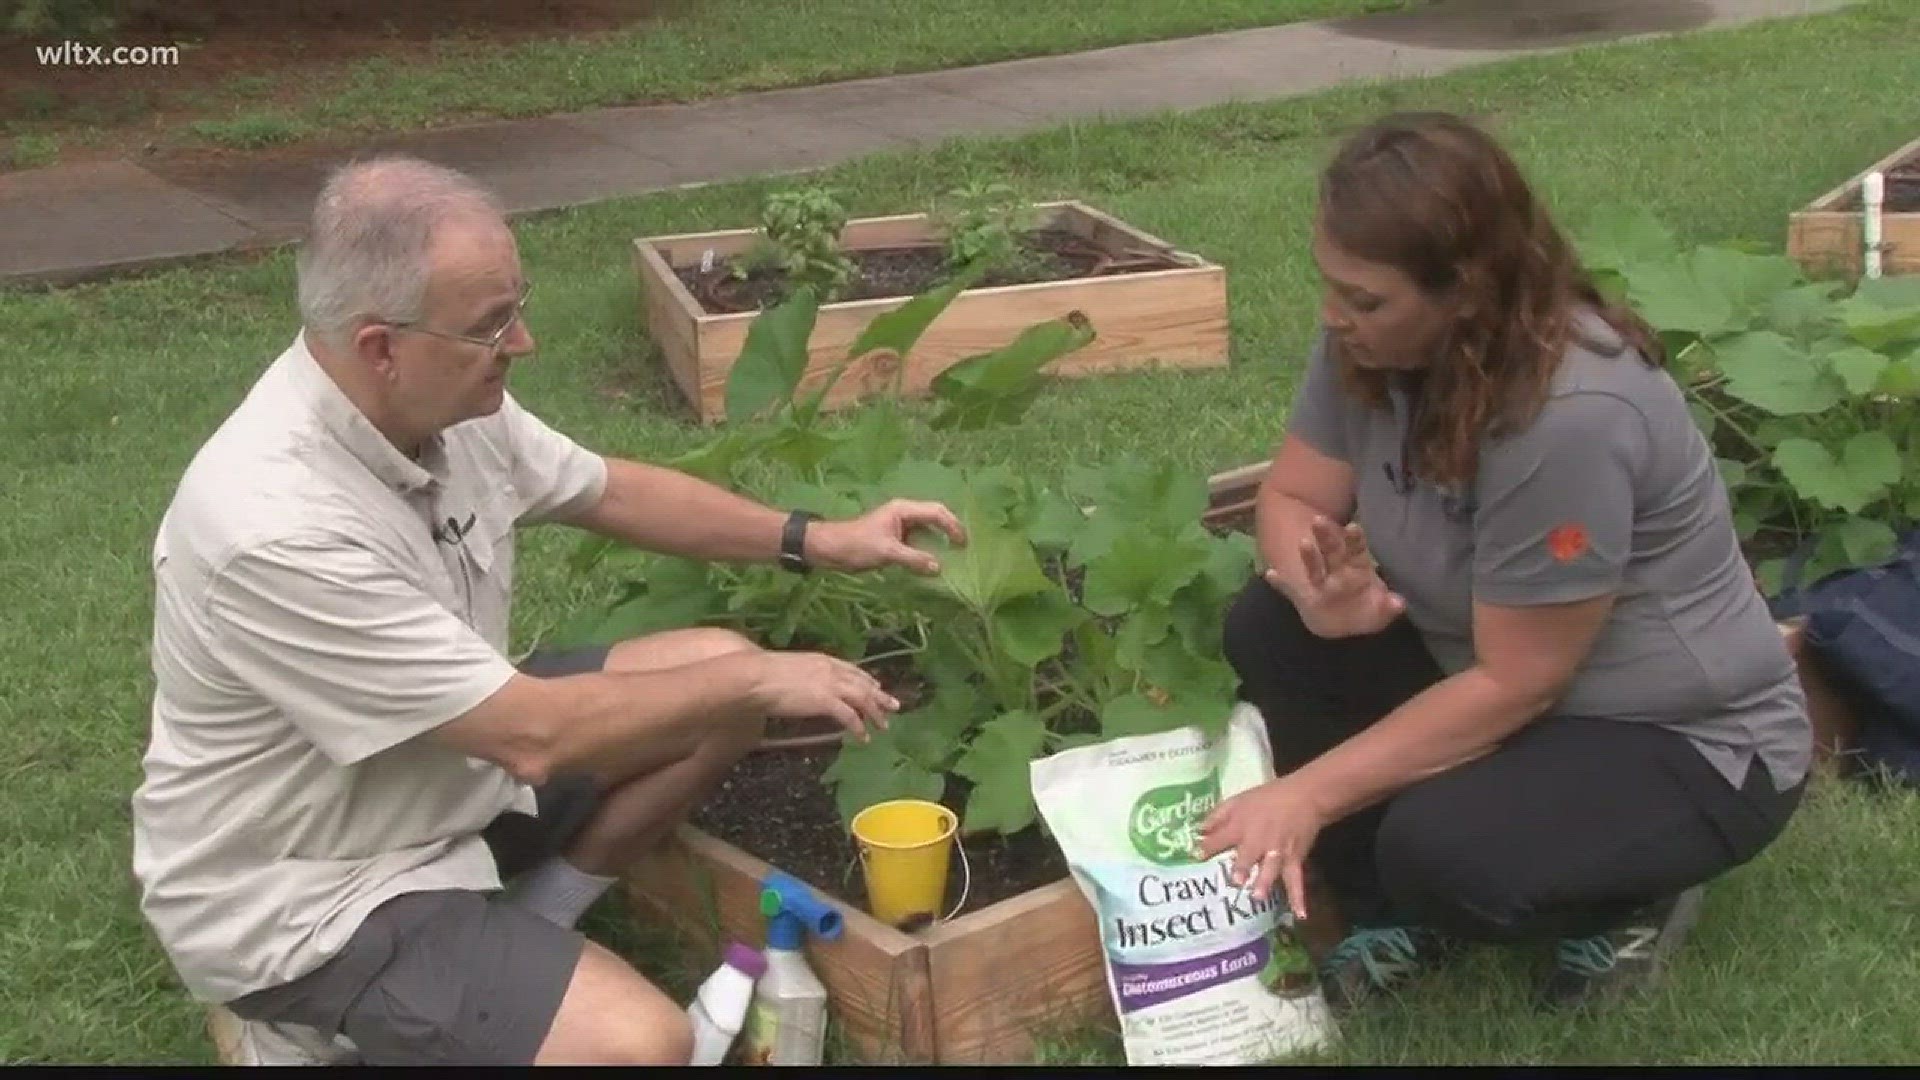 In this segment, Jim Gandy finds ways to prevent this common pest that goes after your garden squash.